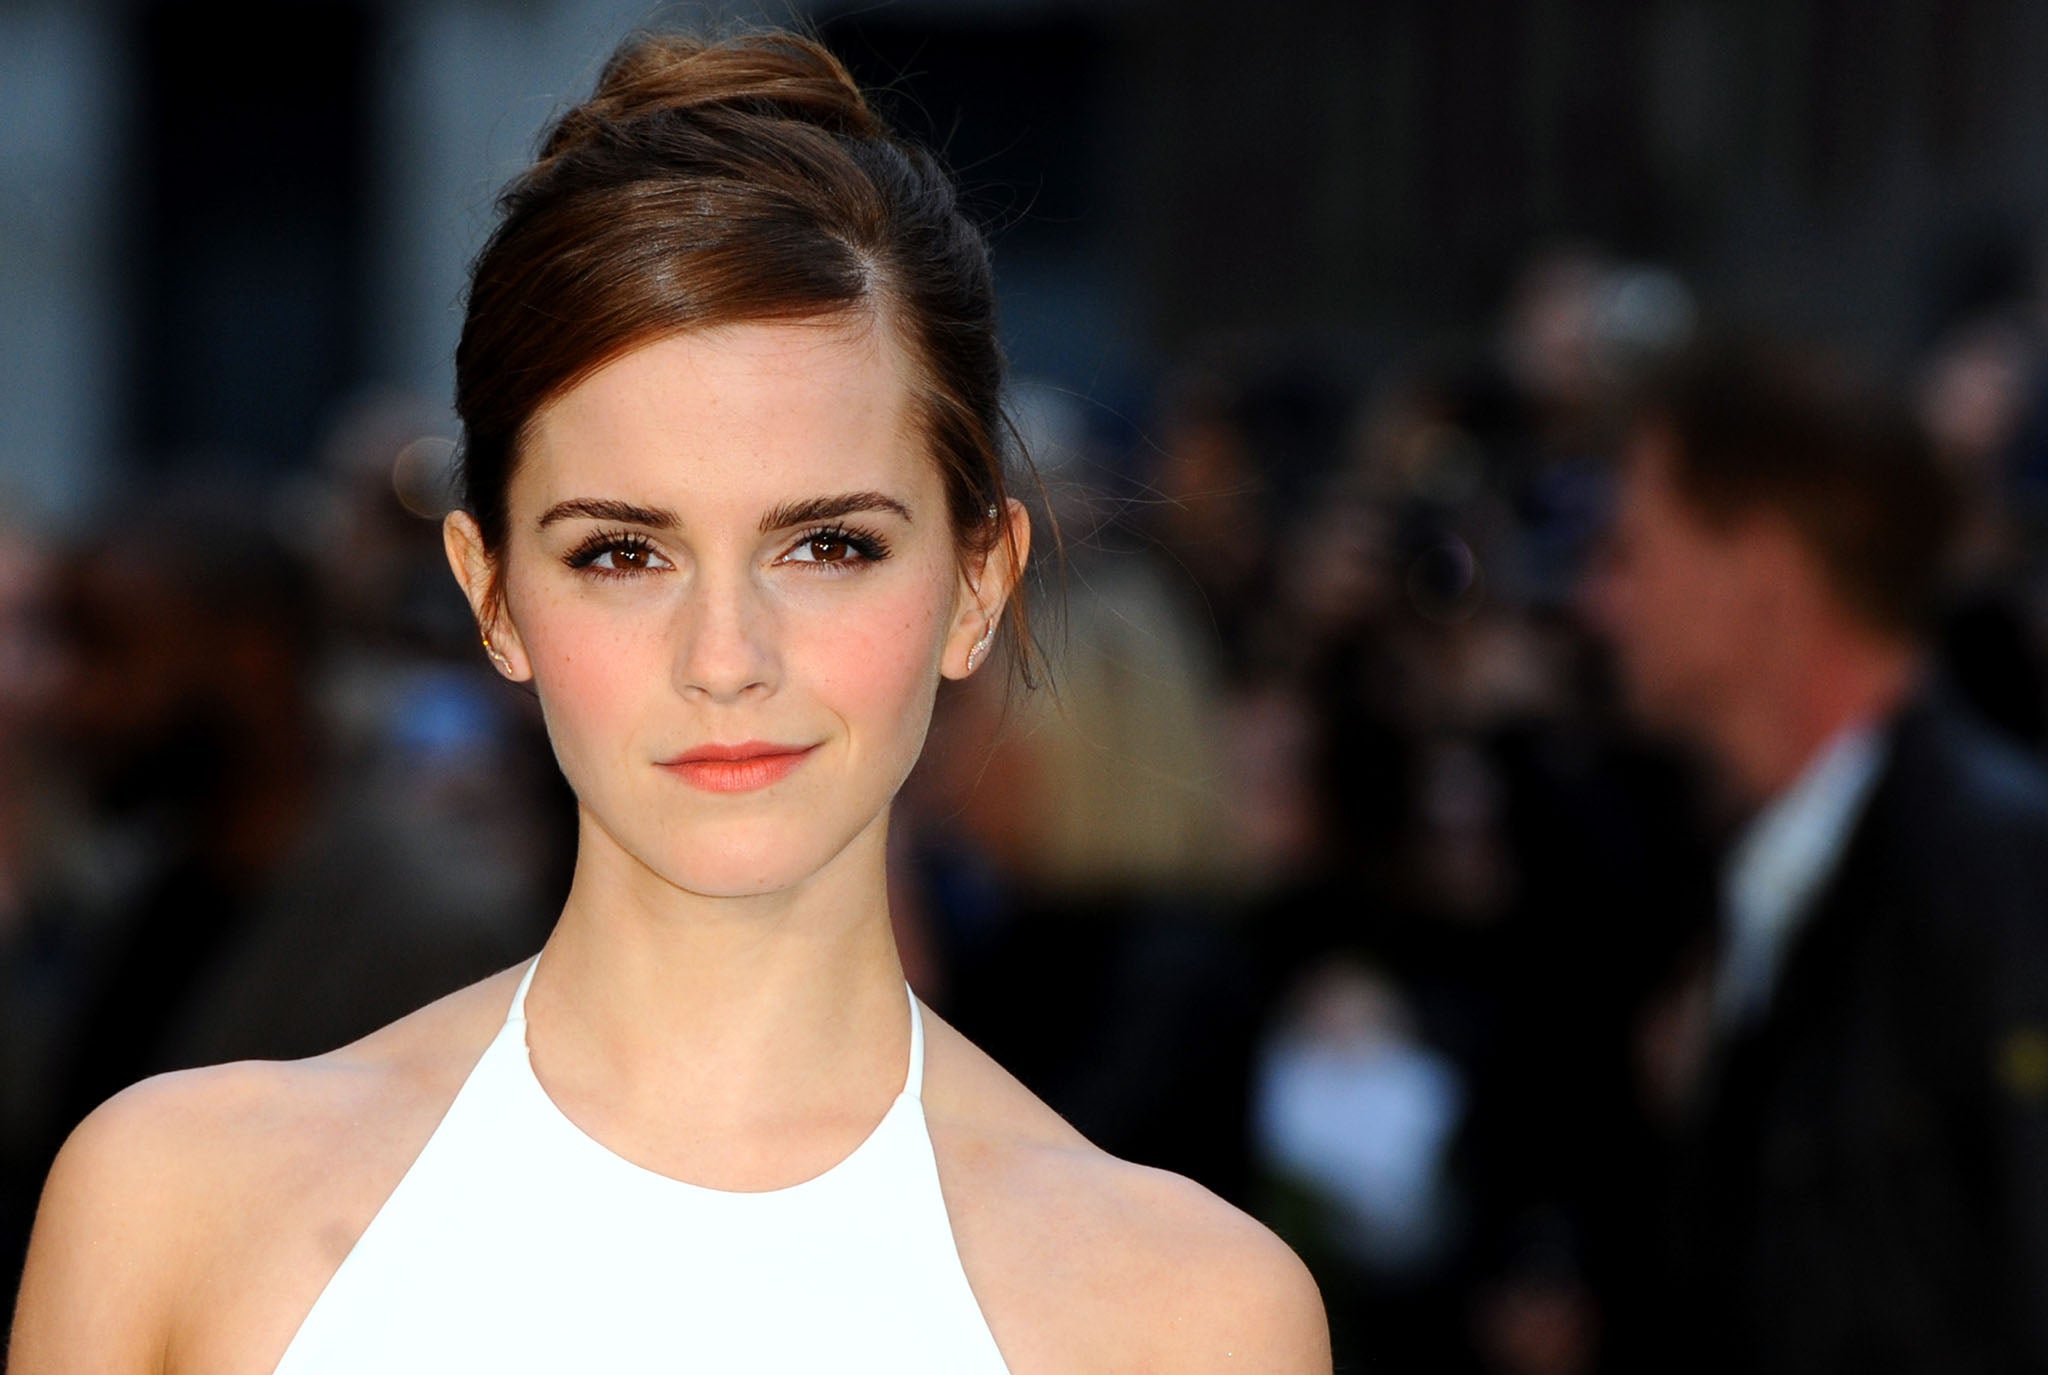 Emma Watson naked photos to be leaked within days claim 4Chan hackers The Independent The Independent